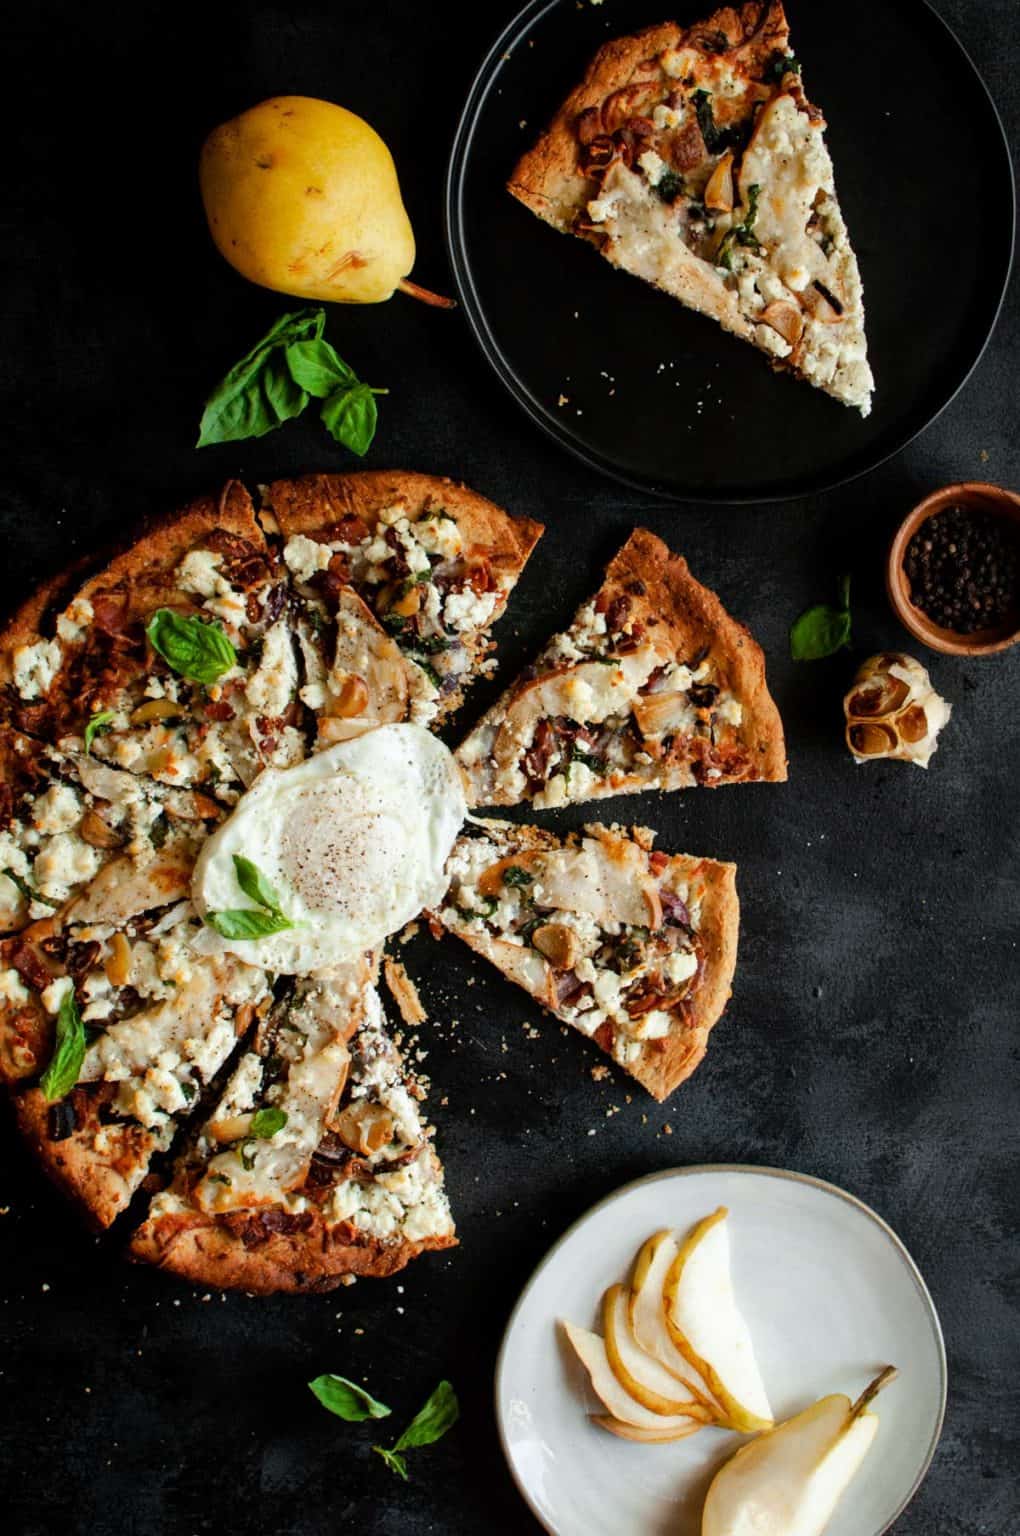 Goat Cheese & Pear Pizza With Caramelized Onions - Classy Egg Option!